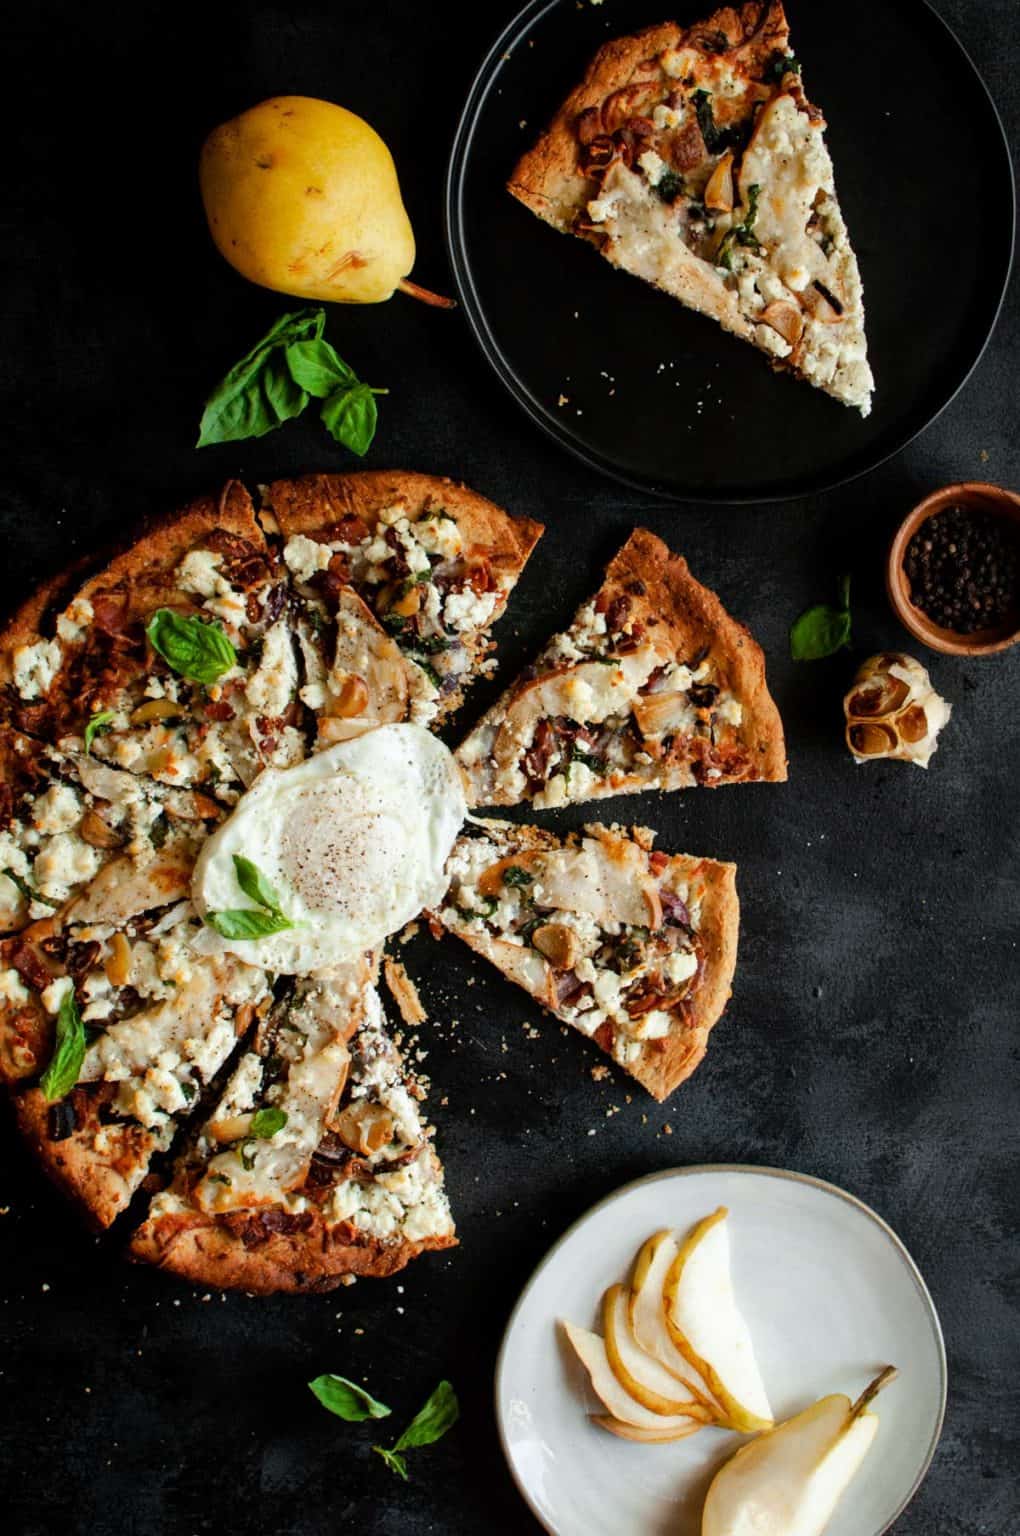 Goat Cheese & Pear Pizza With Caramelized Onions - Classy Egg Option!